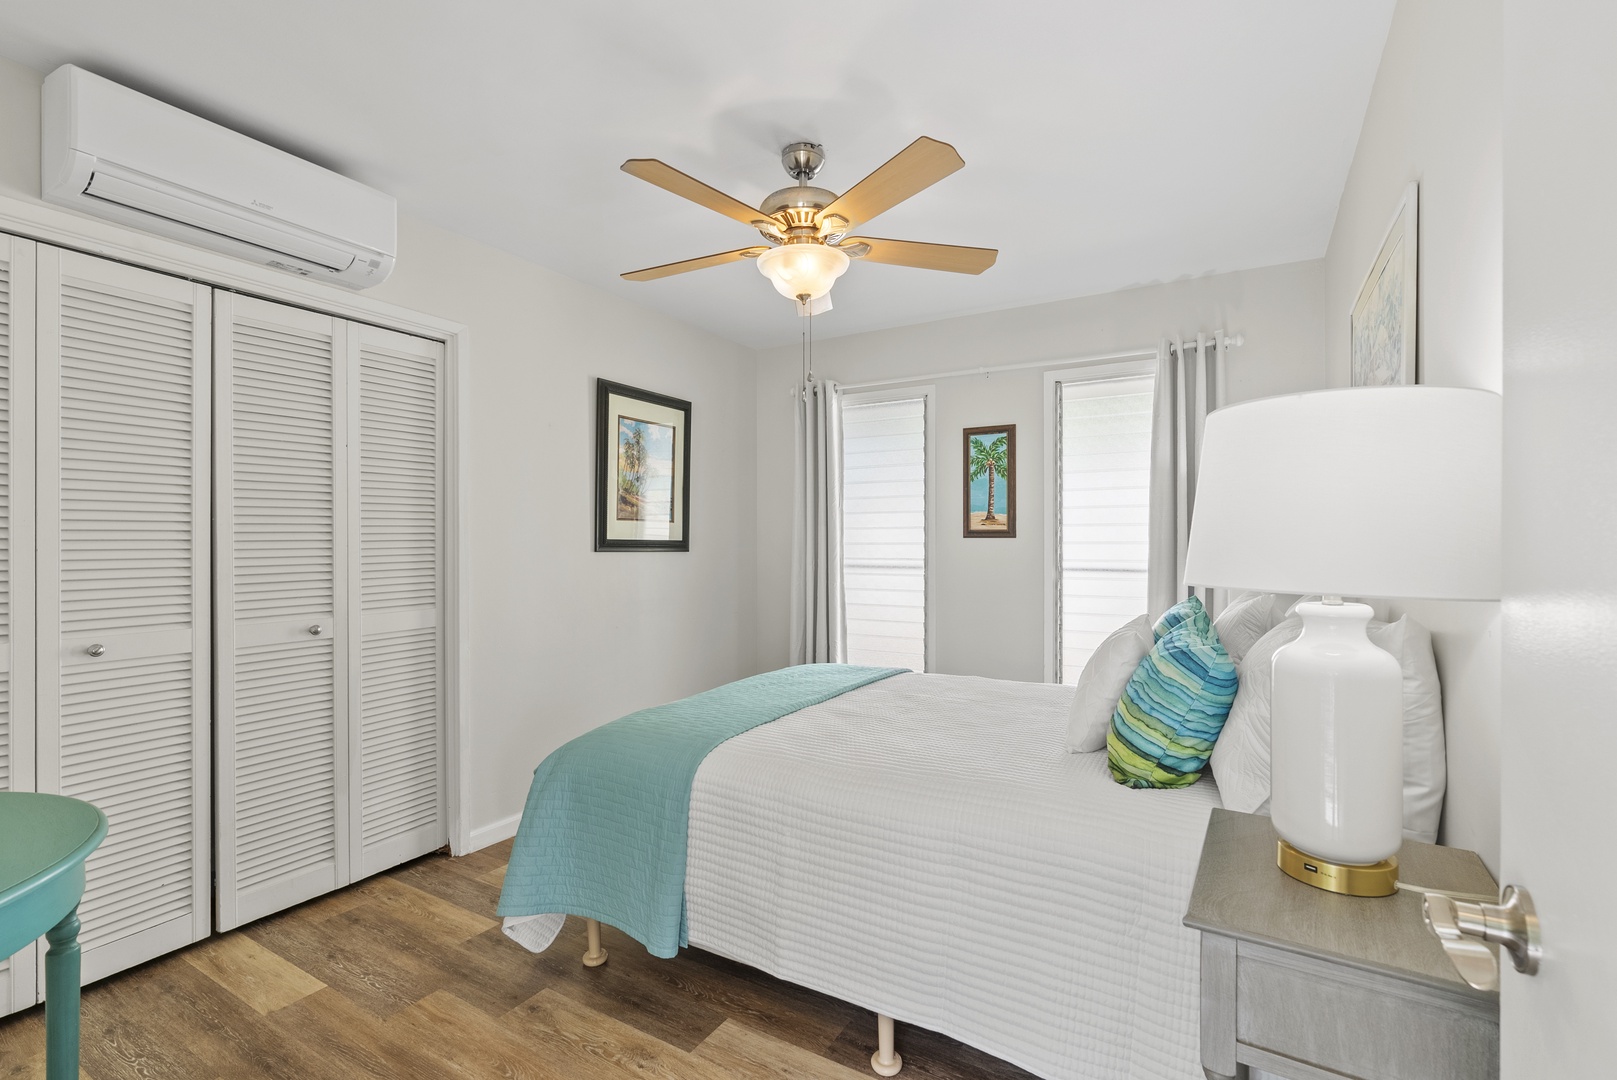 Kailua Vacation Rentals, Hale Aloha - Third guest suite with a split-type AC